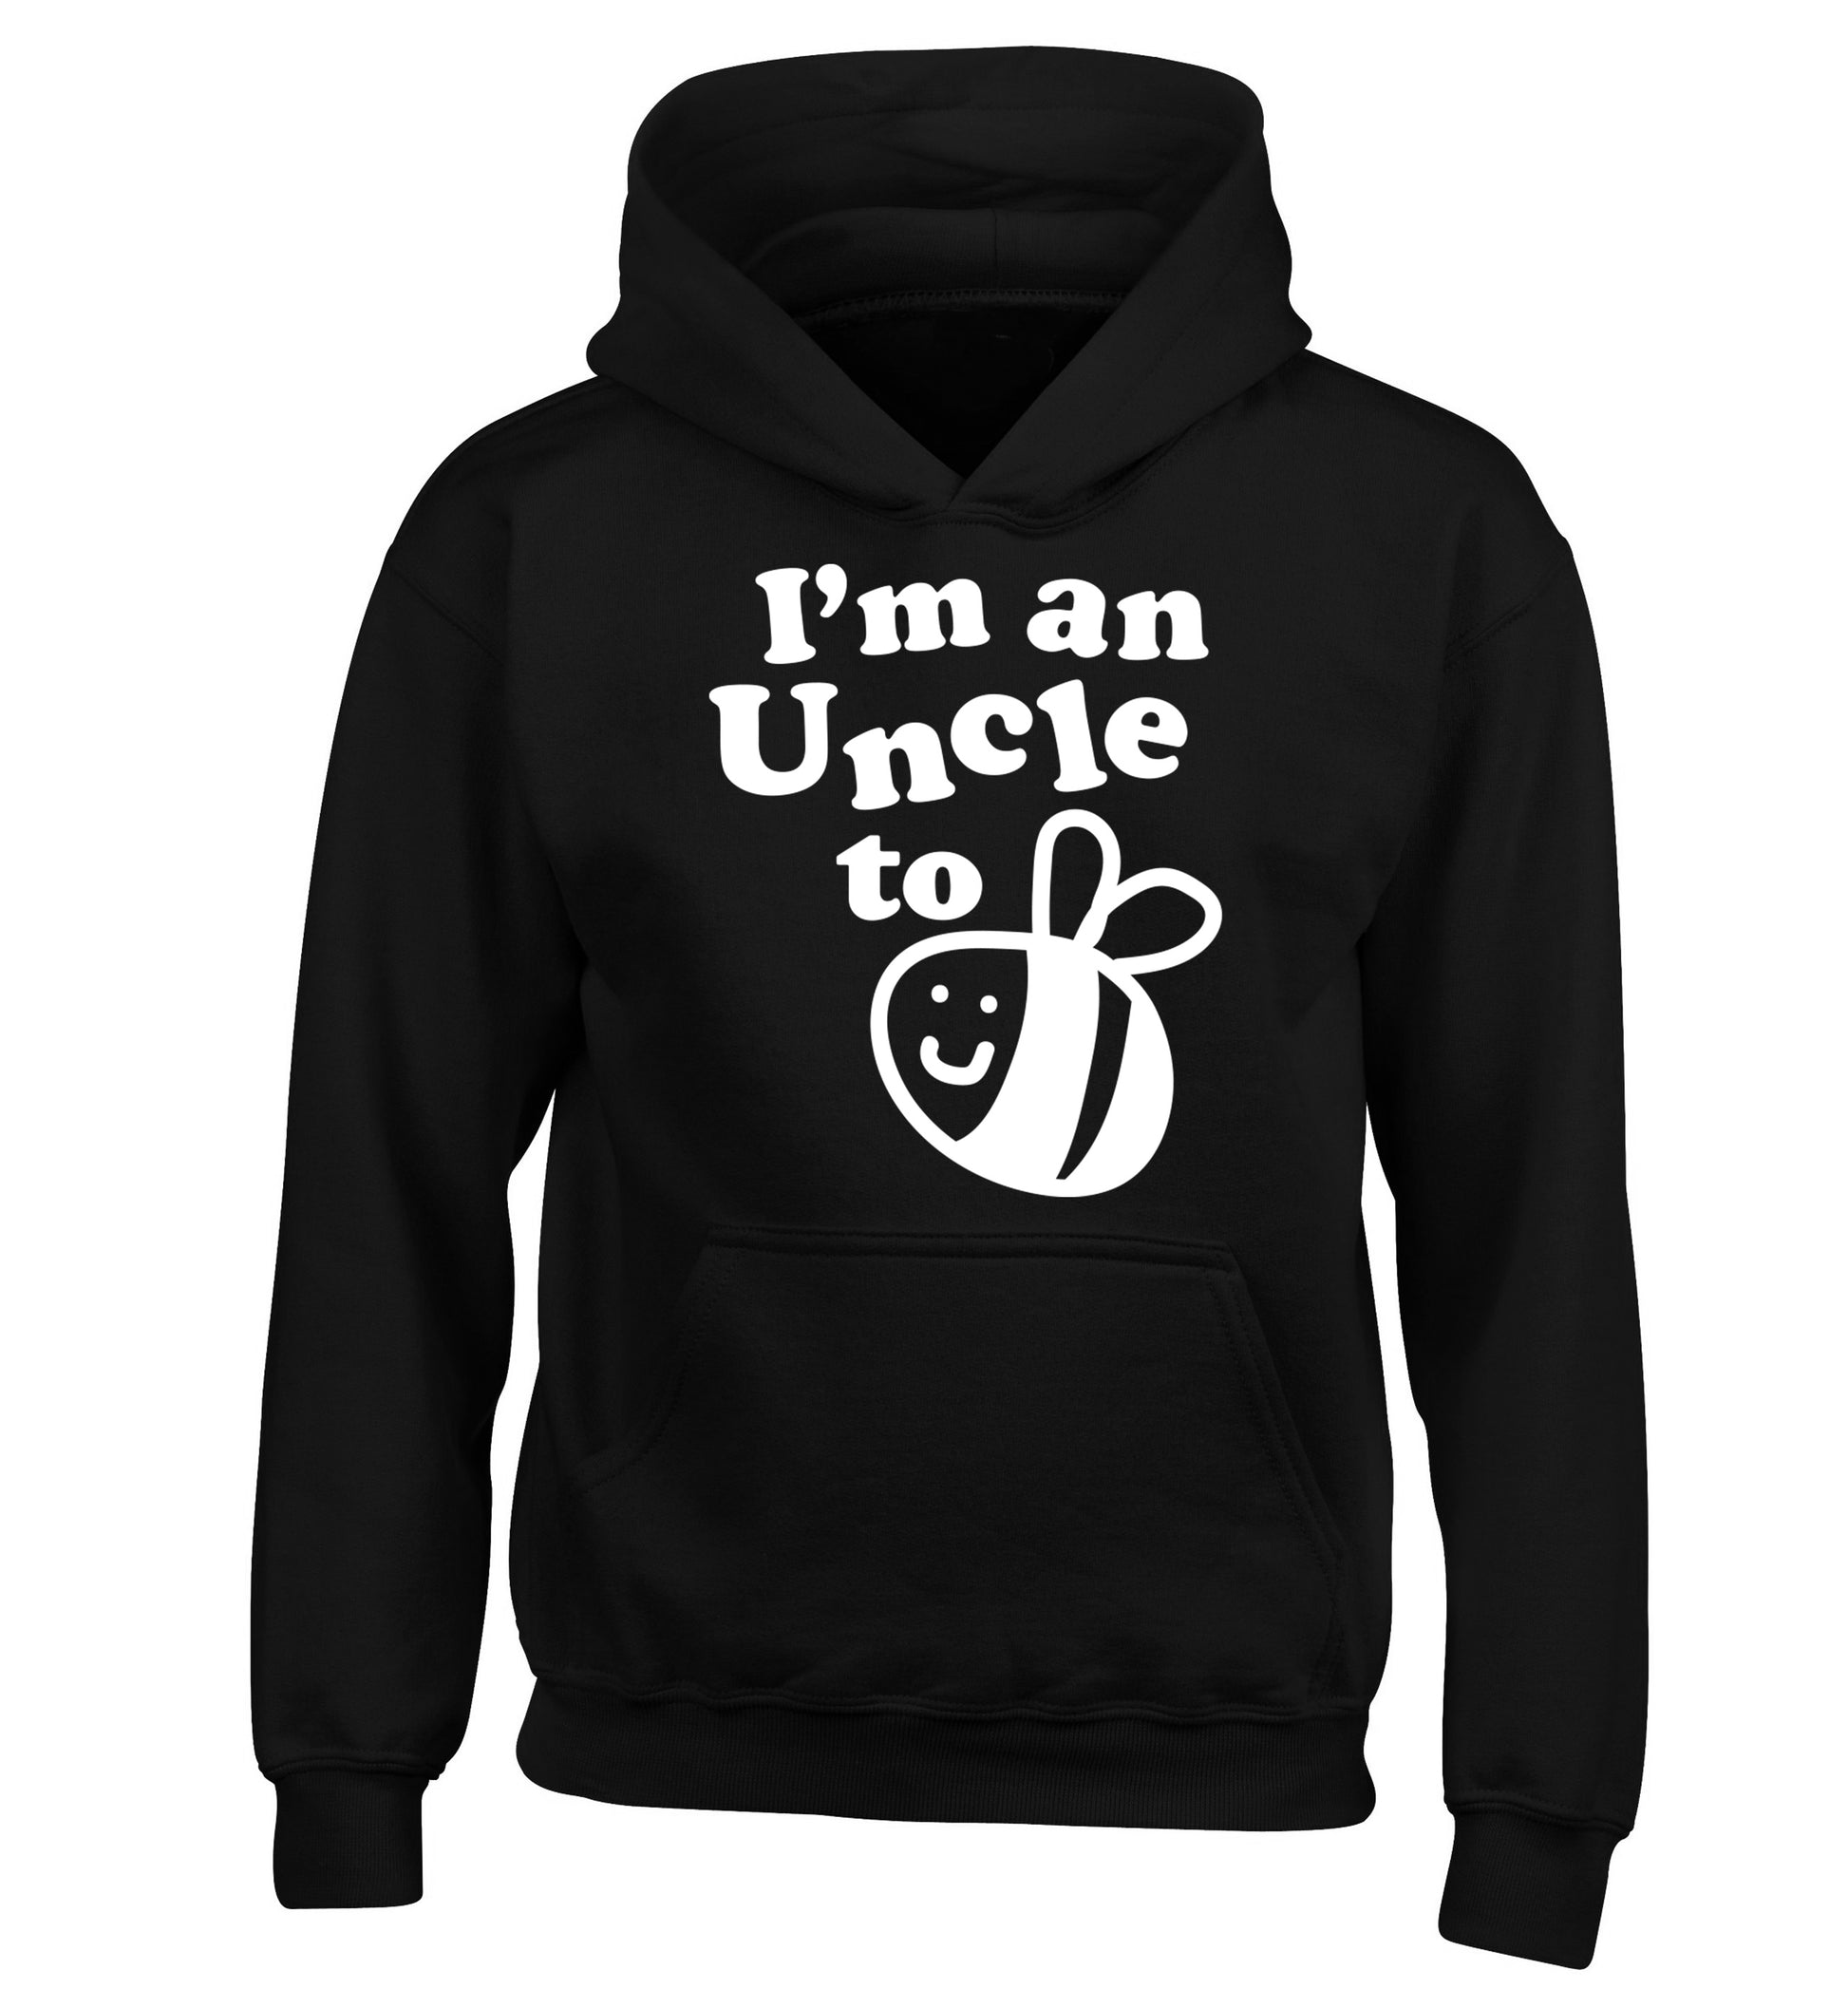 I'm an uncle to be children's black hoodie 12-14 Years